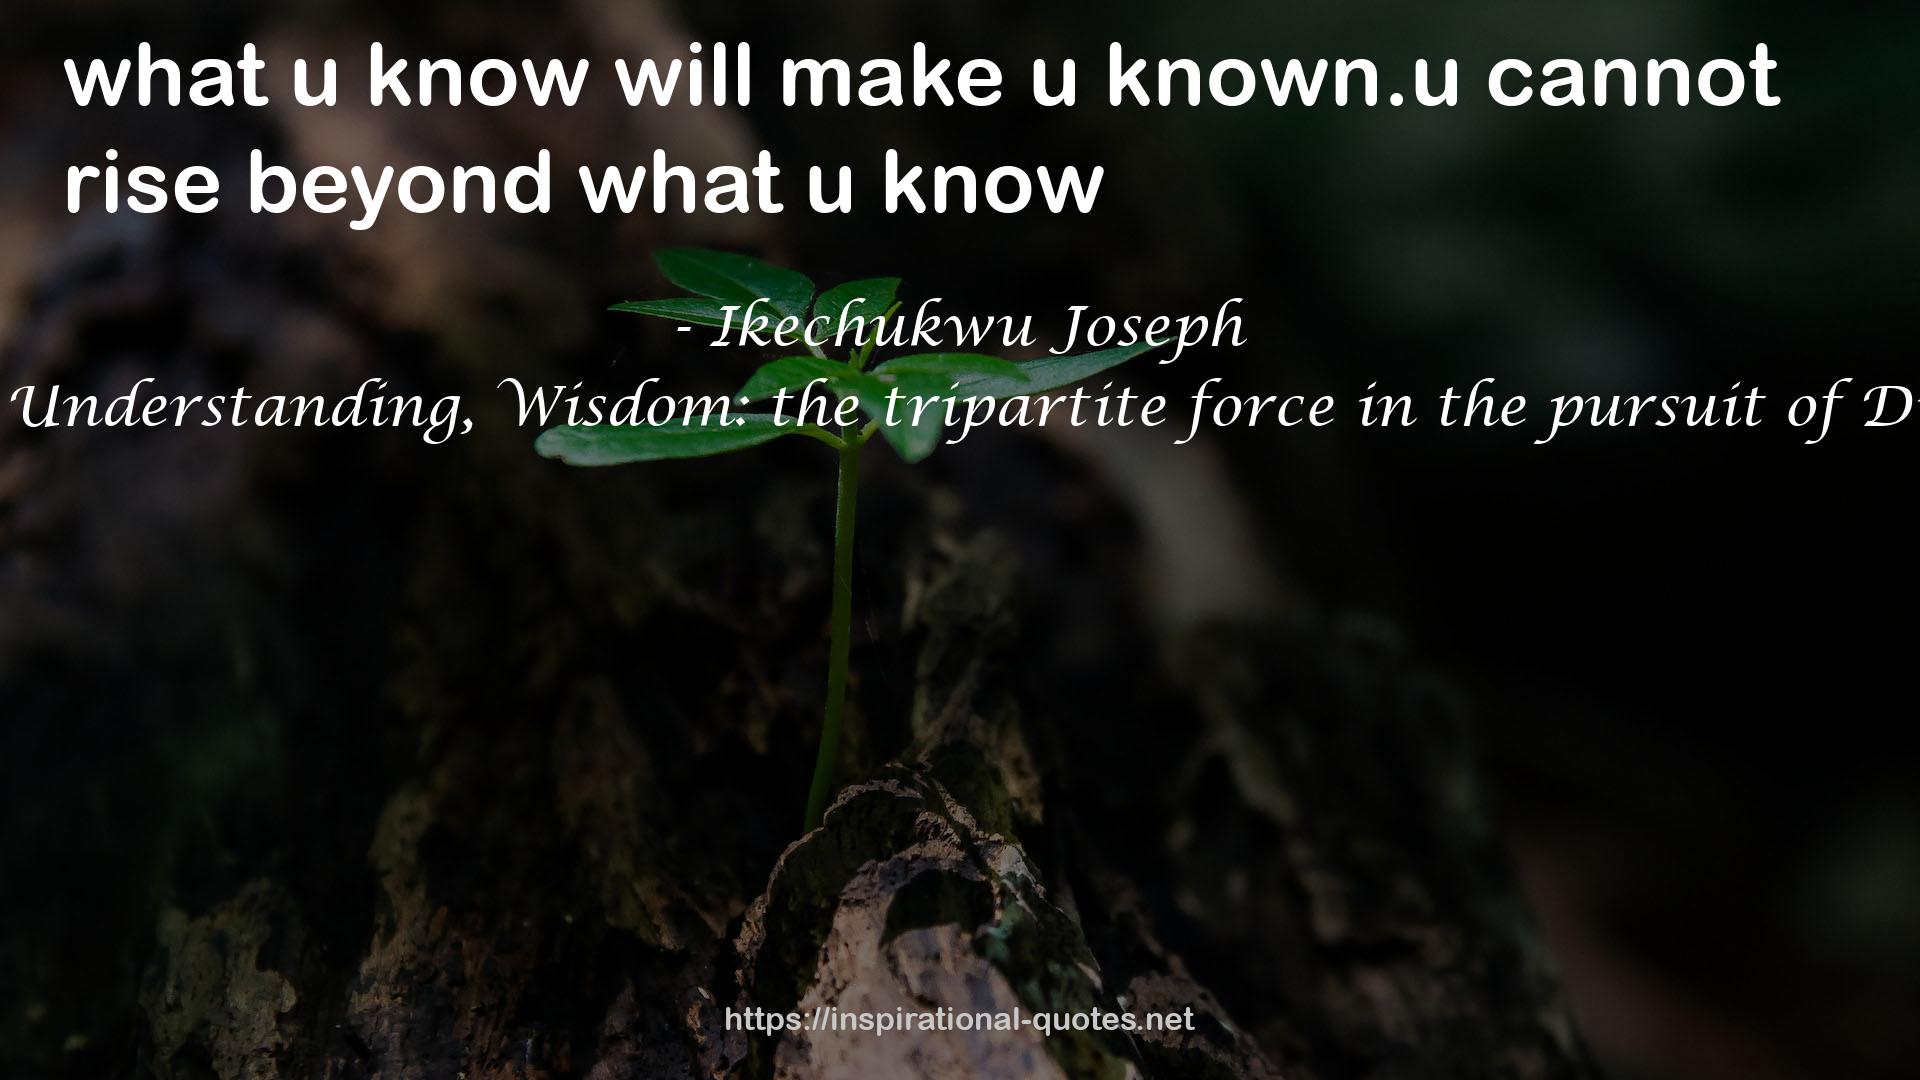 known.u  QUOTES